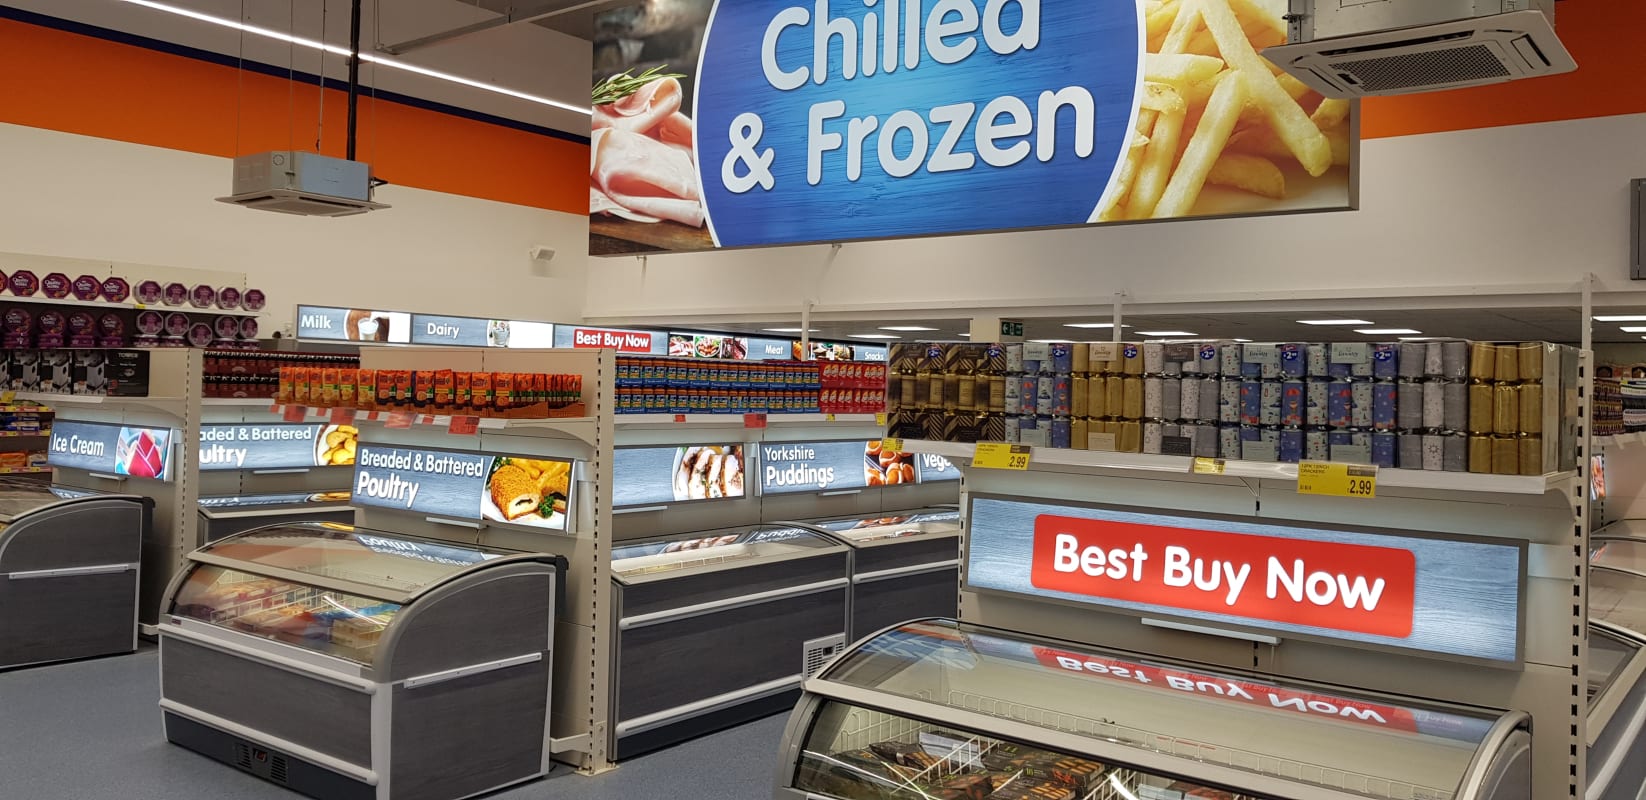 B&M's Shrewsbury store benefits from our new fresh and frozen range of food, so you can do all your grocery shopping in one place.